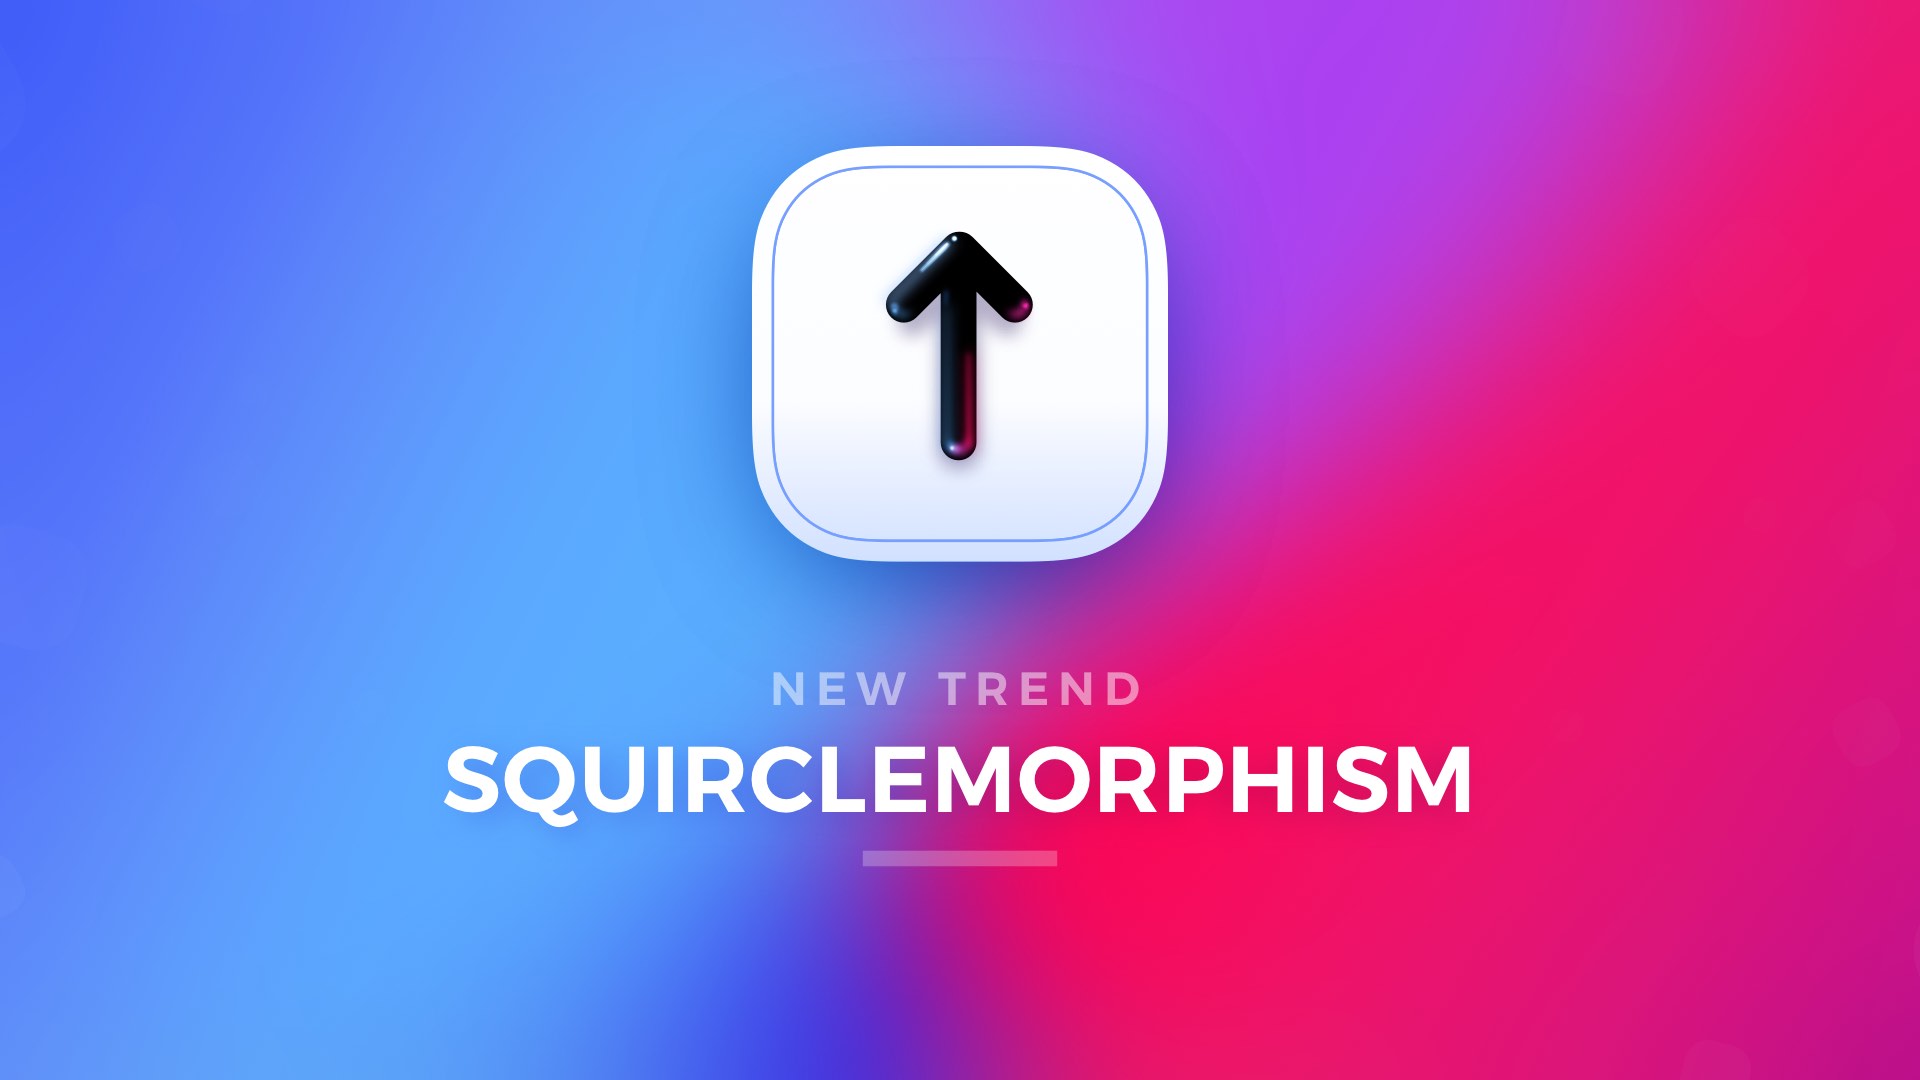 Squirclemorphism featured image